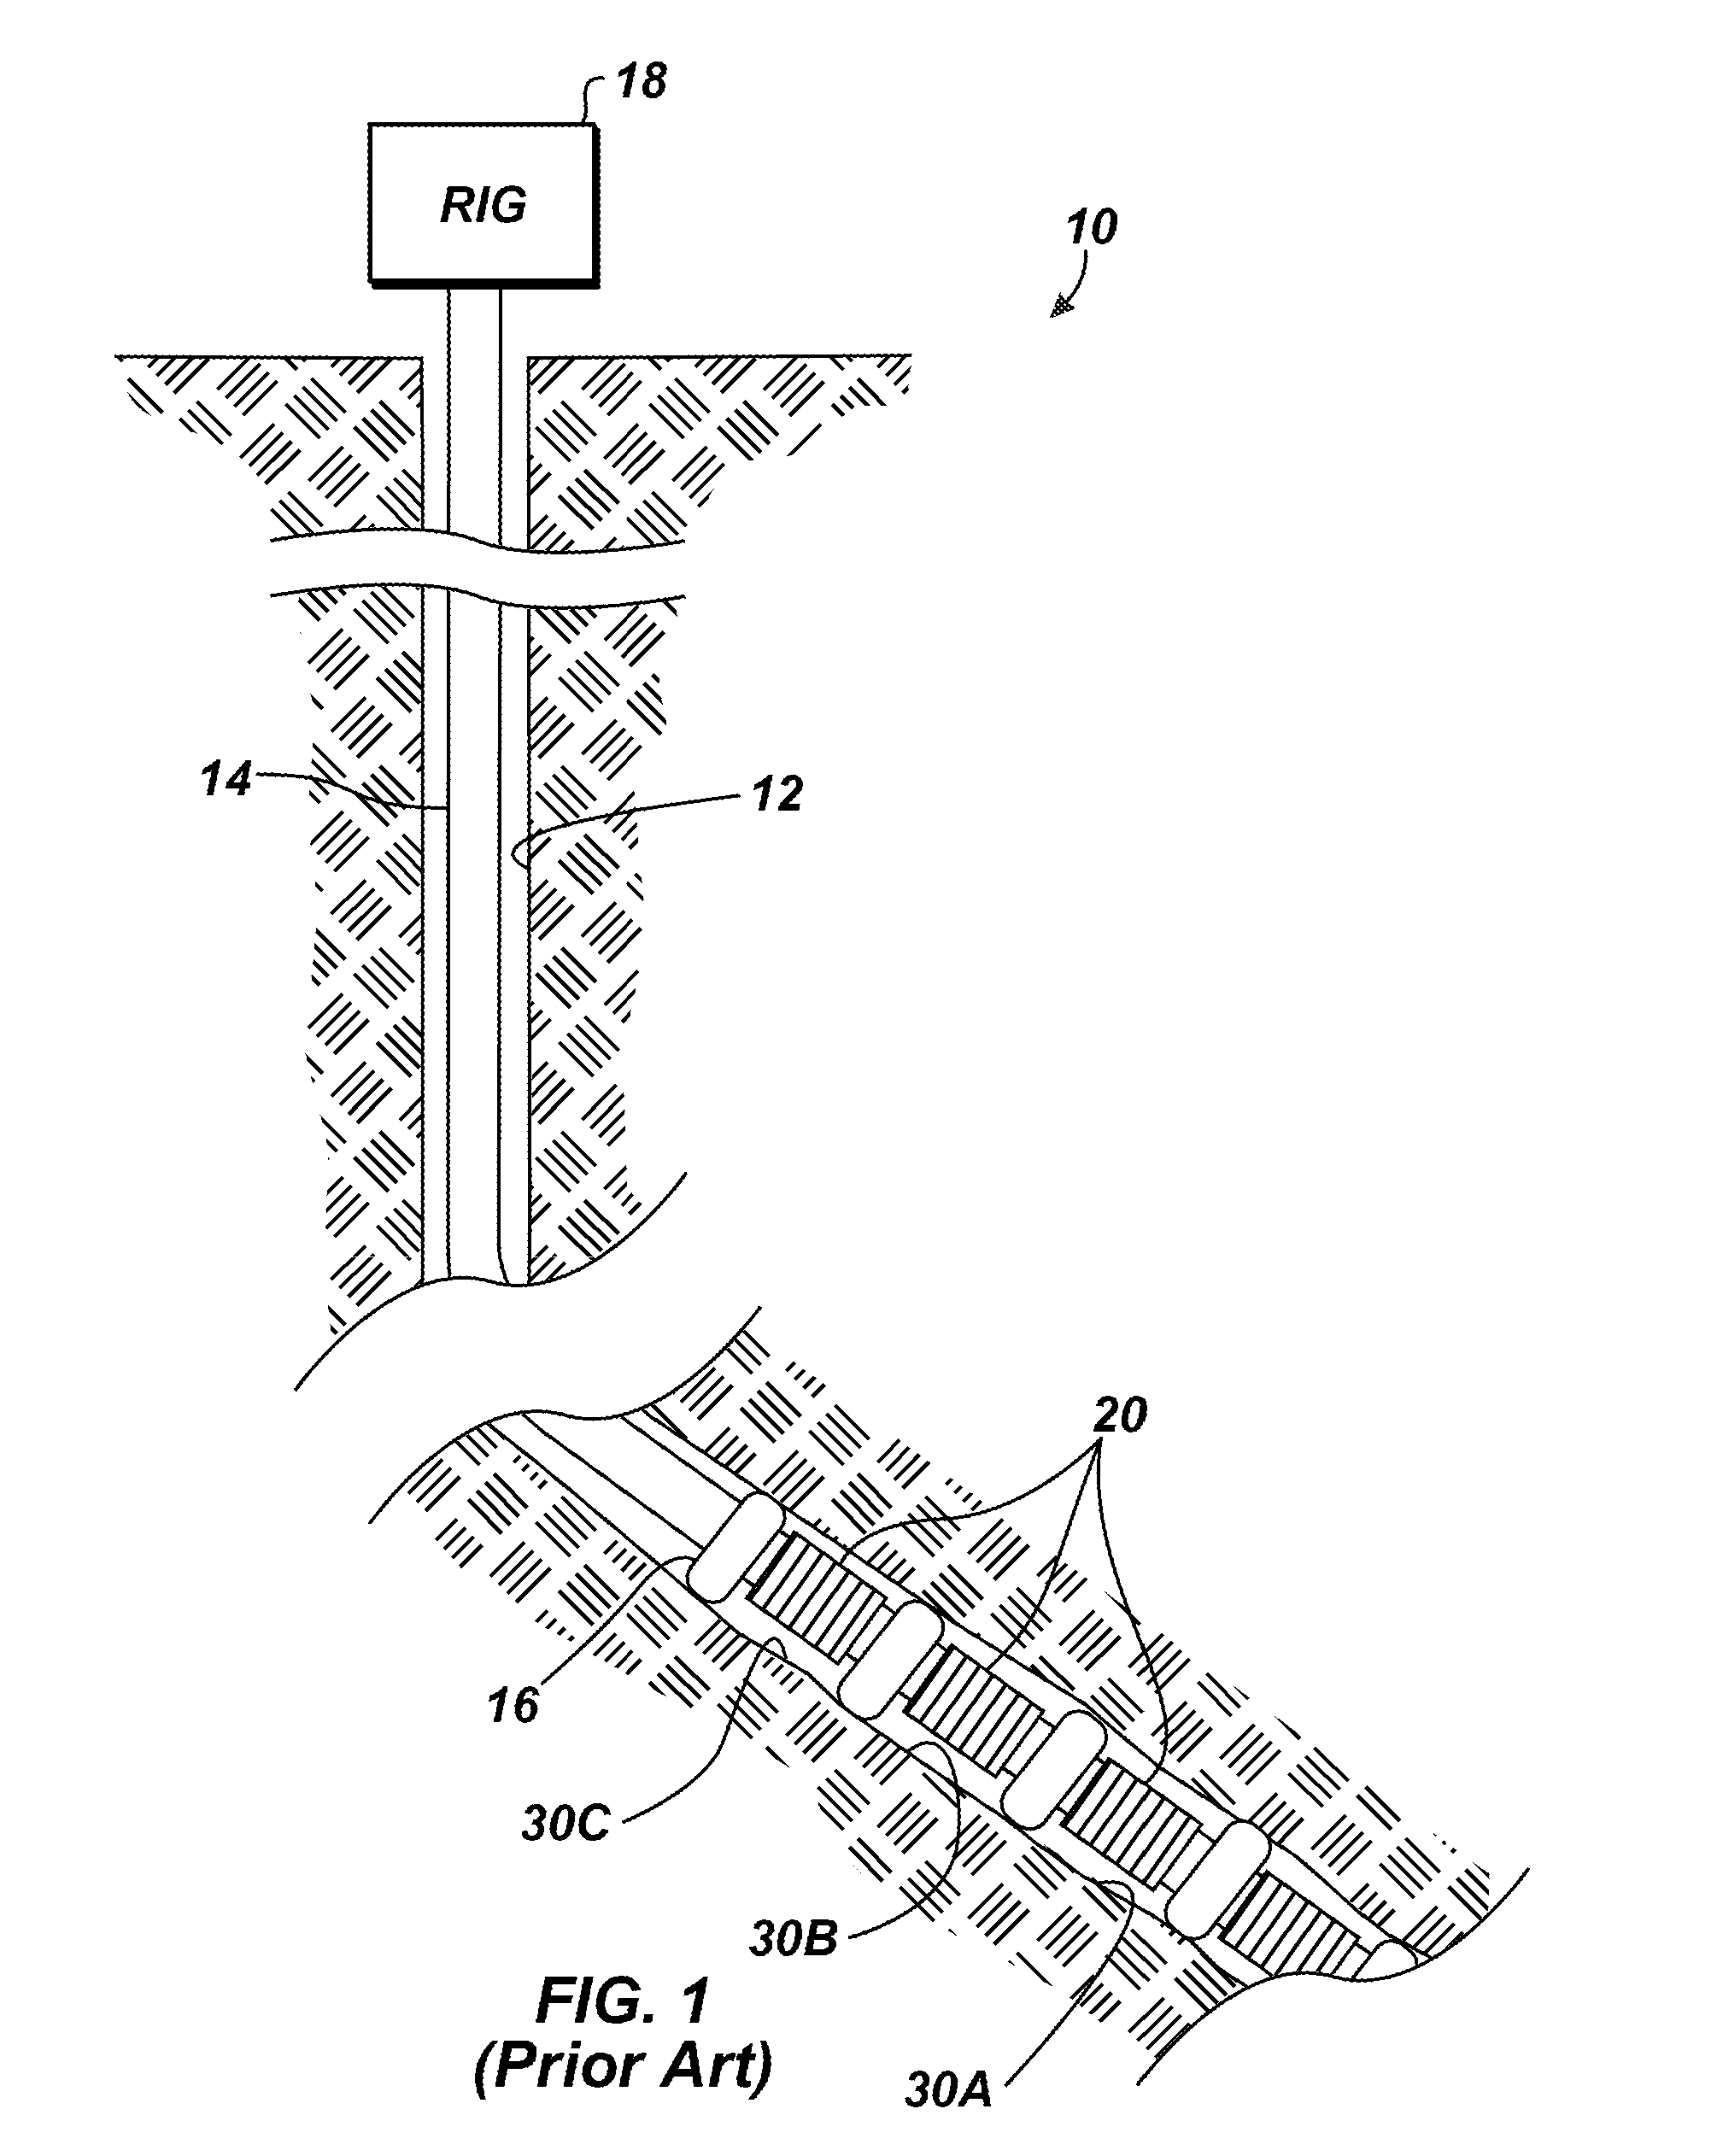 High-Rate Injection Screen Assembly with Checkable Ports